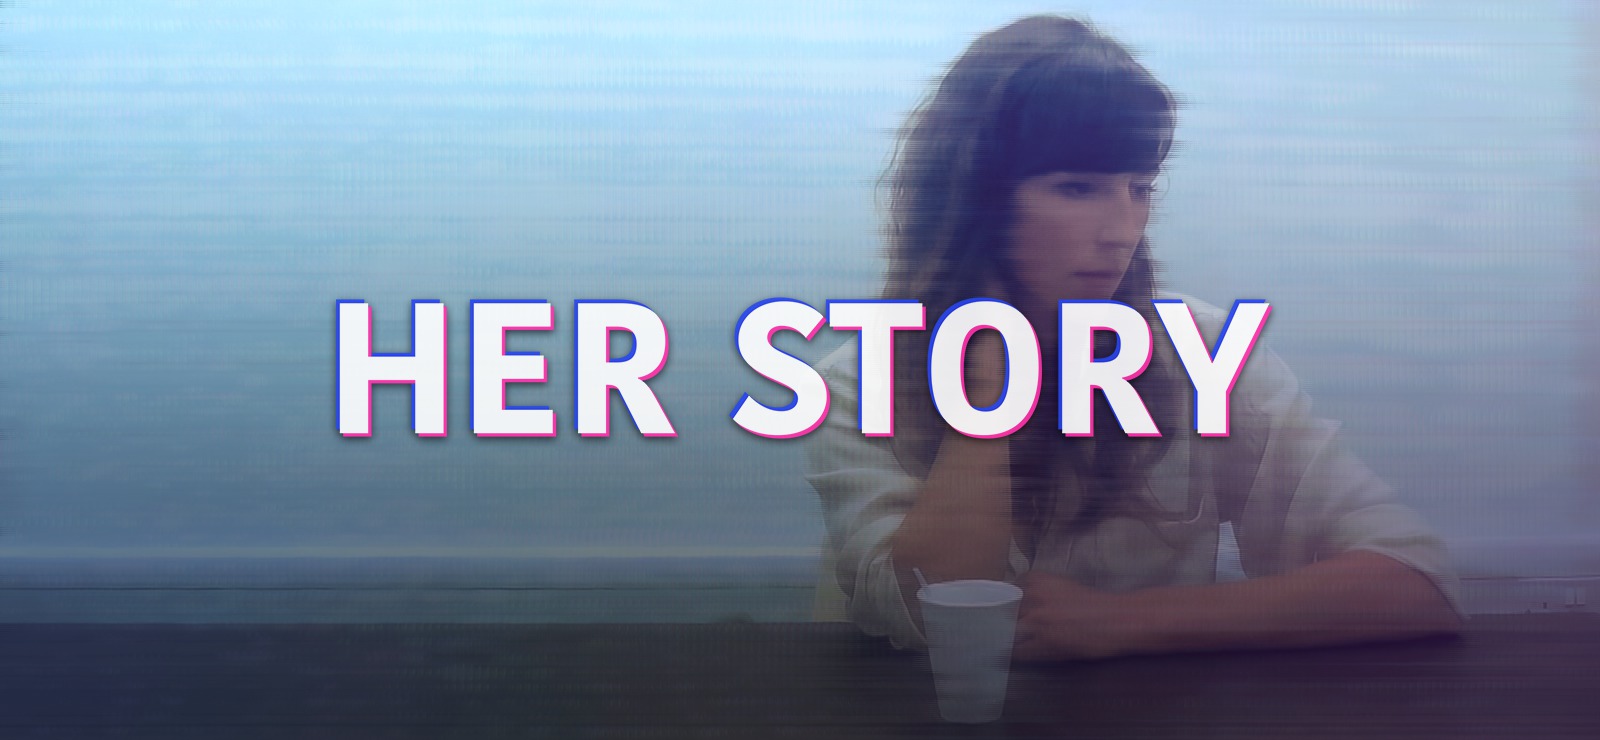 Her Story. A game where you are watching old video recordings of a woman’s testimony and trying to solve a murder. Very fun. My wife was completely addicted to it.